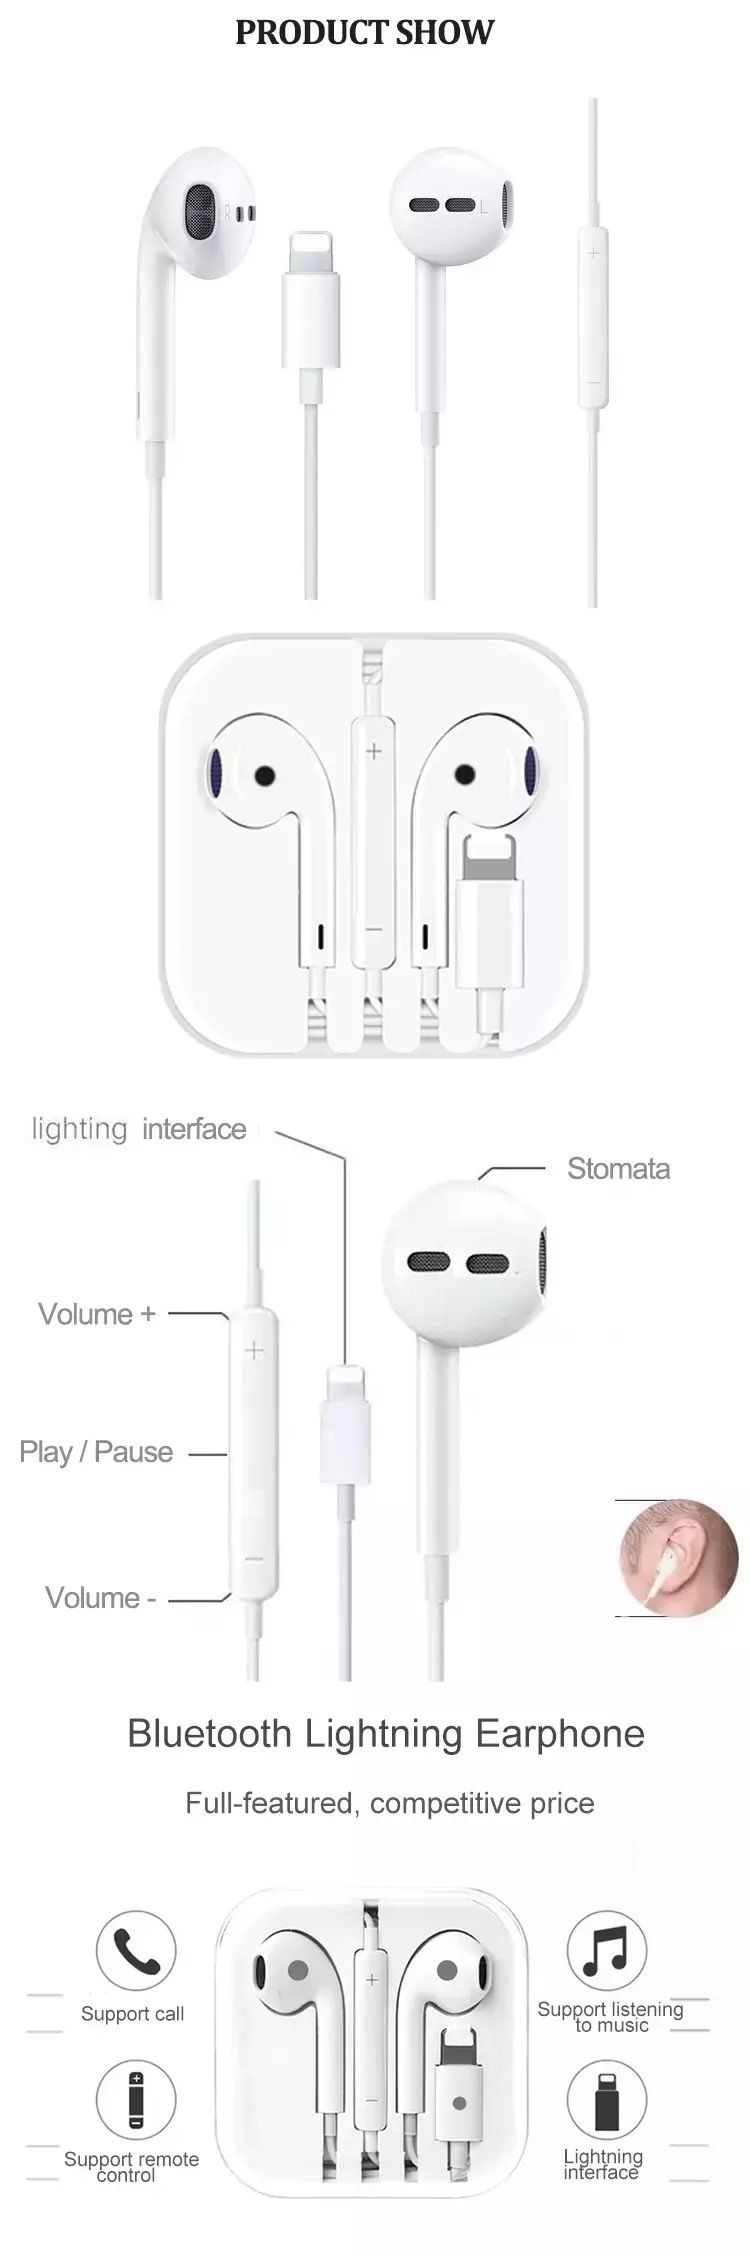 iphone 6 lightning connector and headphone jack